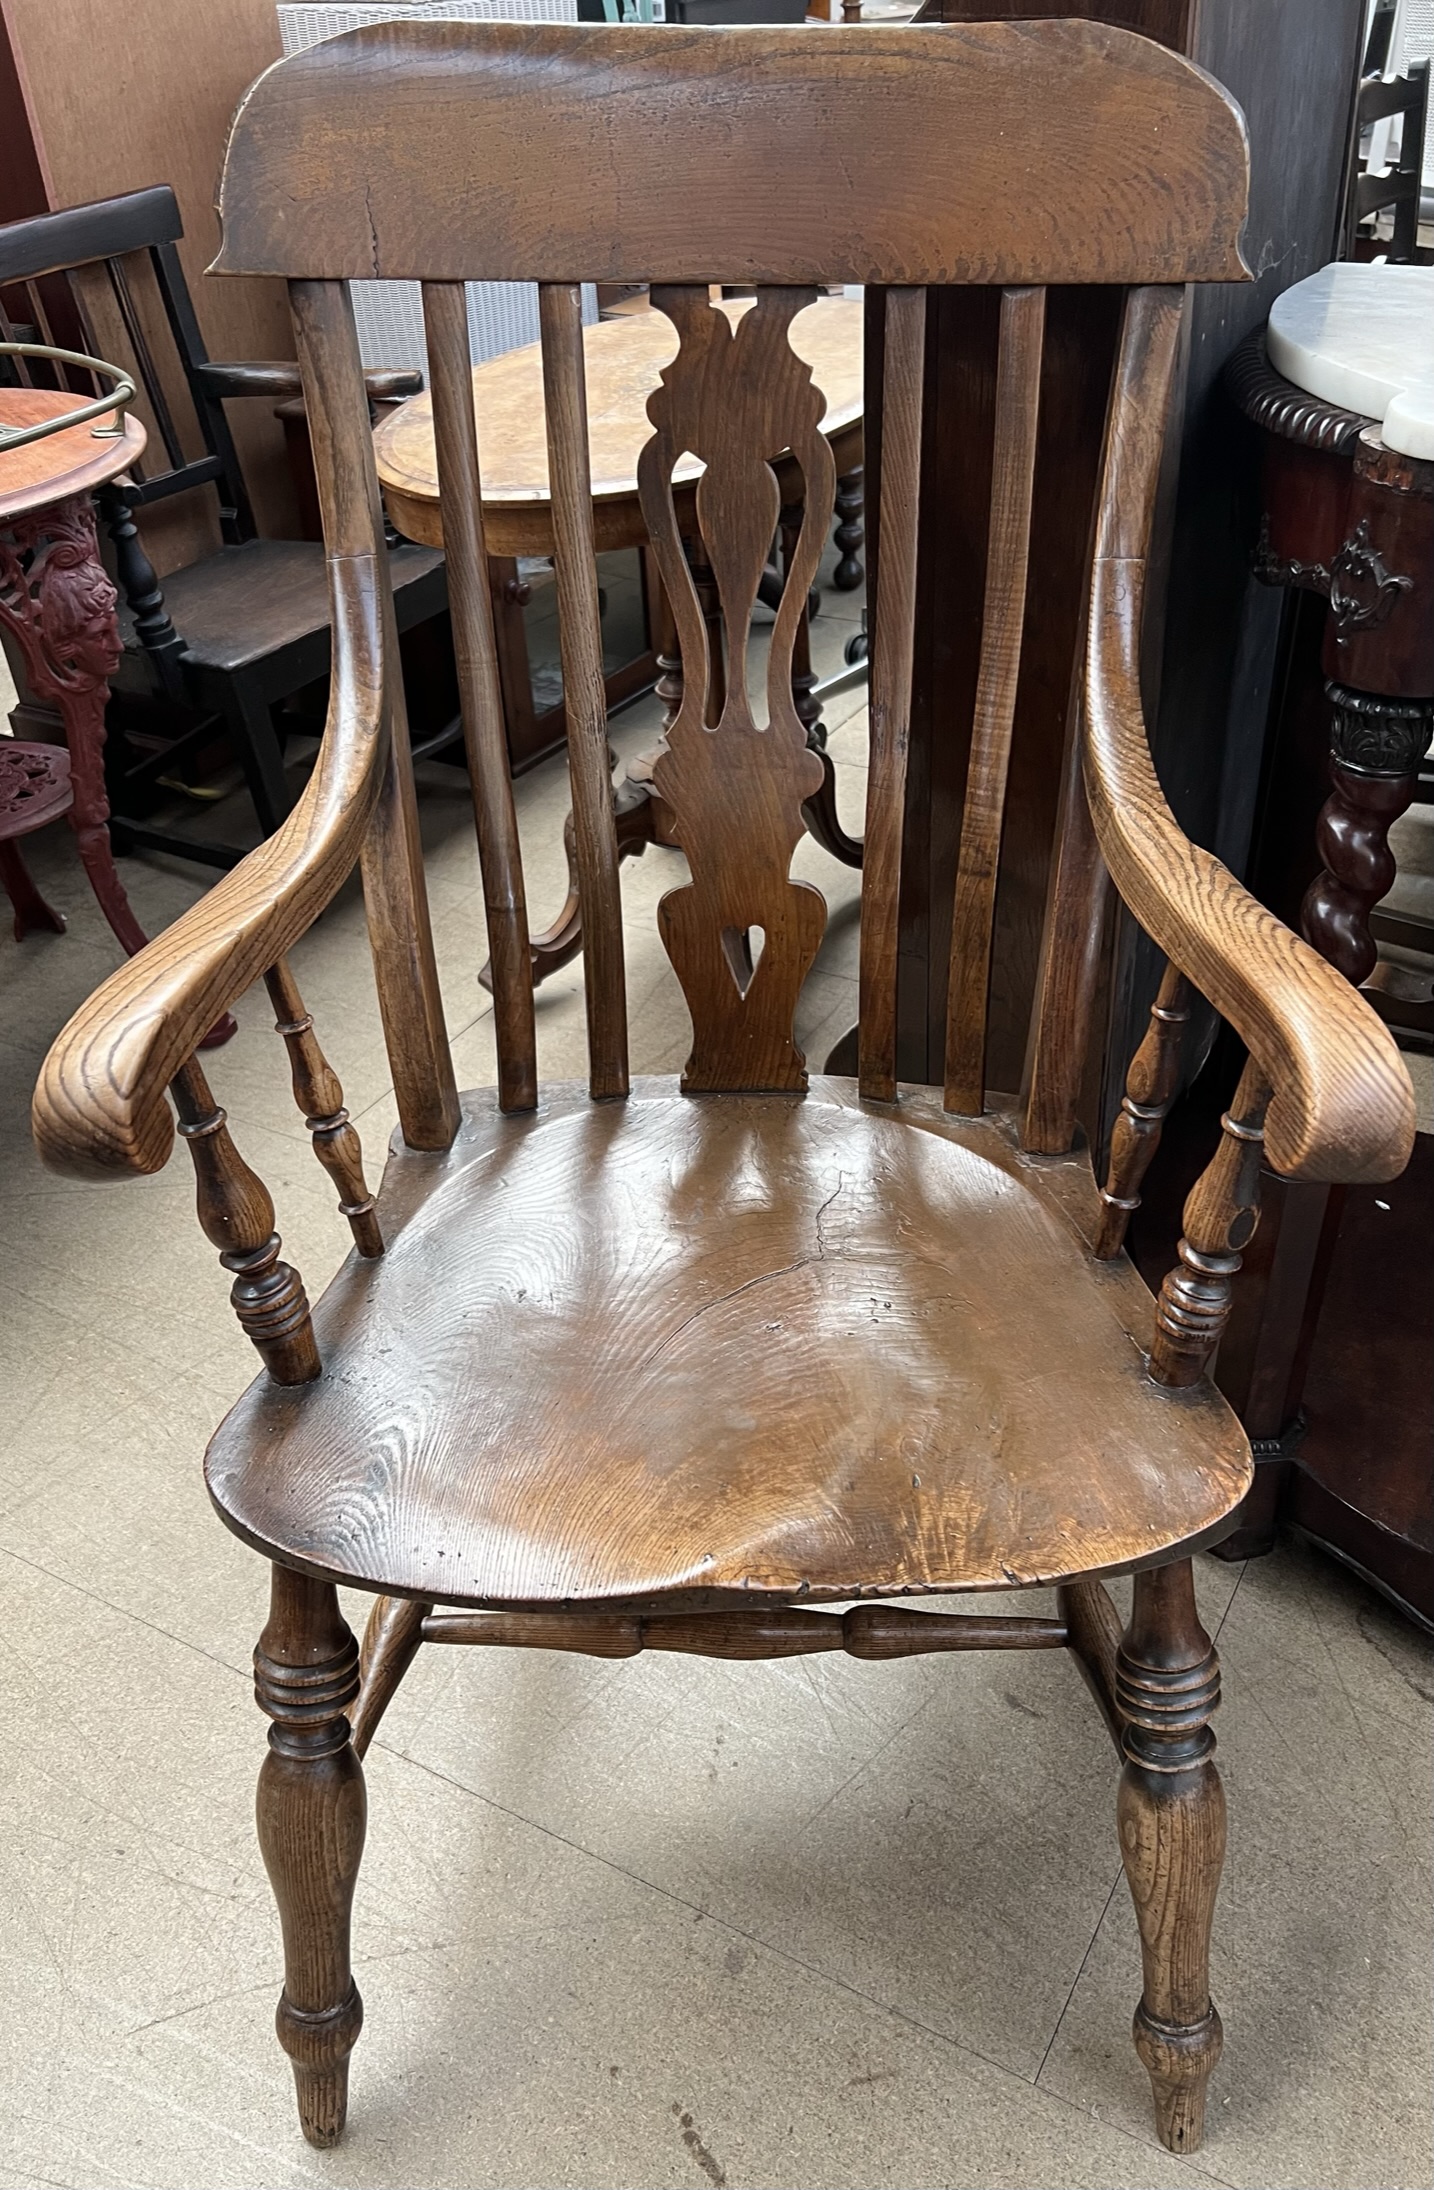 A 19th century kitchen elbow chair with a pierced vase splat and a solid seat on turned legs